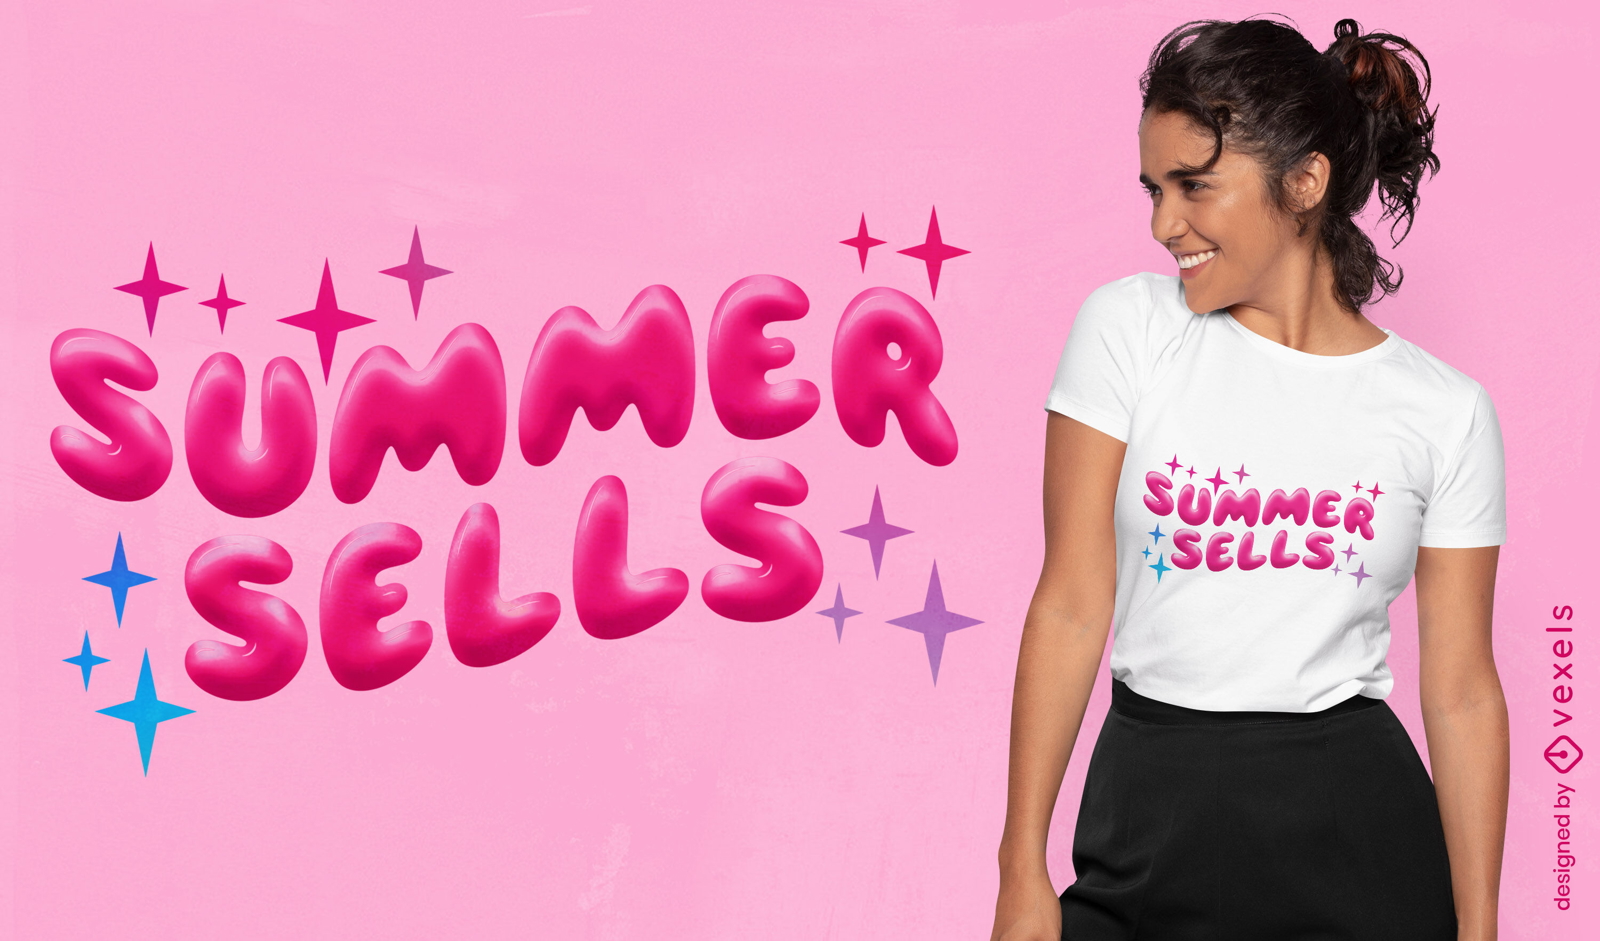 Summer sells cute quote t-shirt design